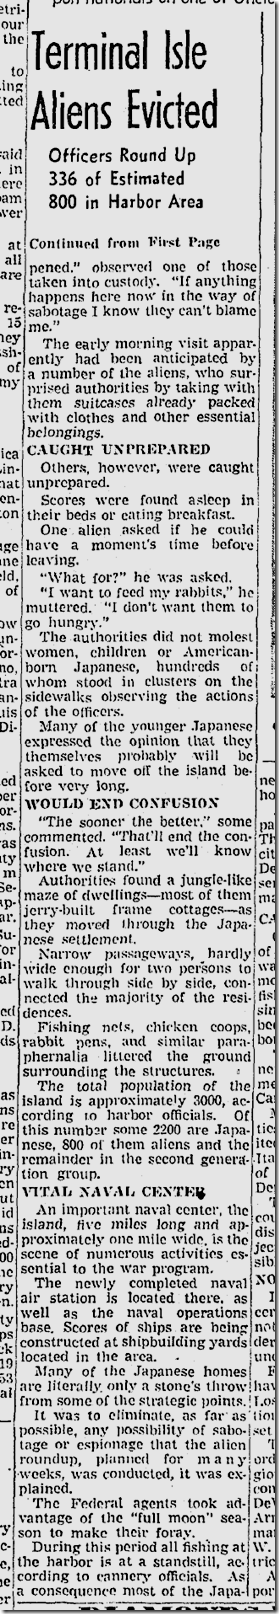 Feb. 3, 1942, Japanese Evictions 